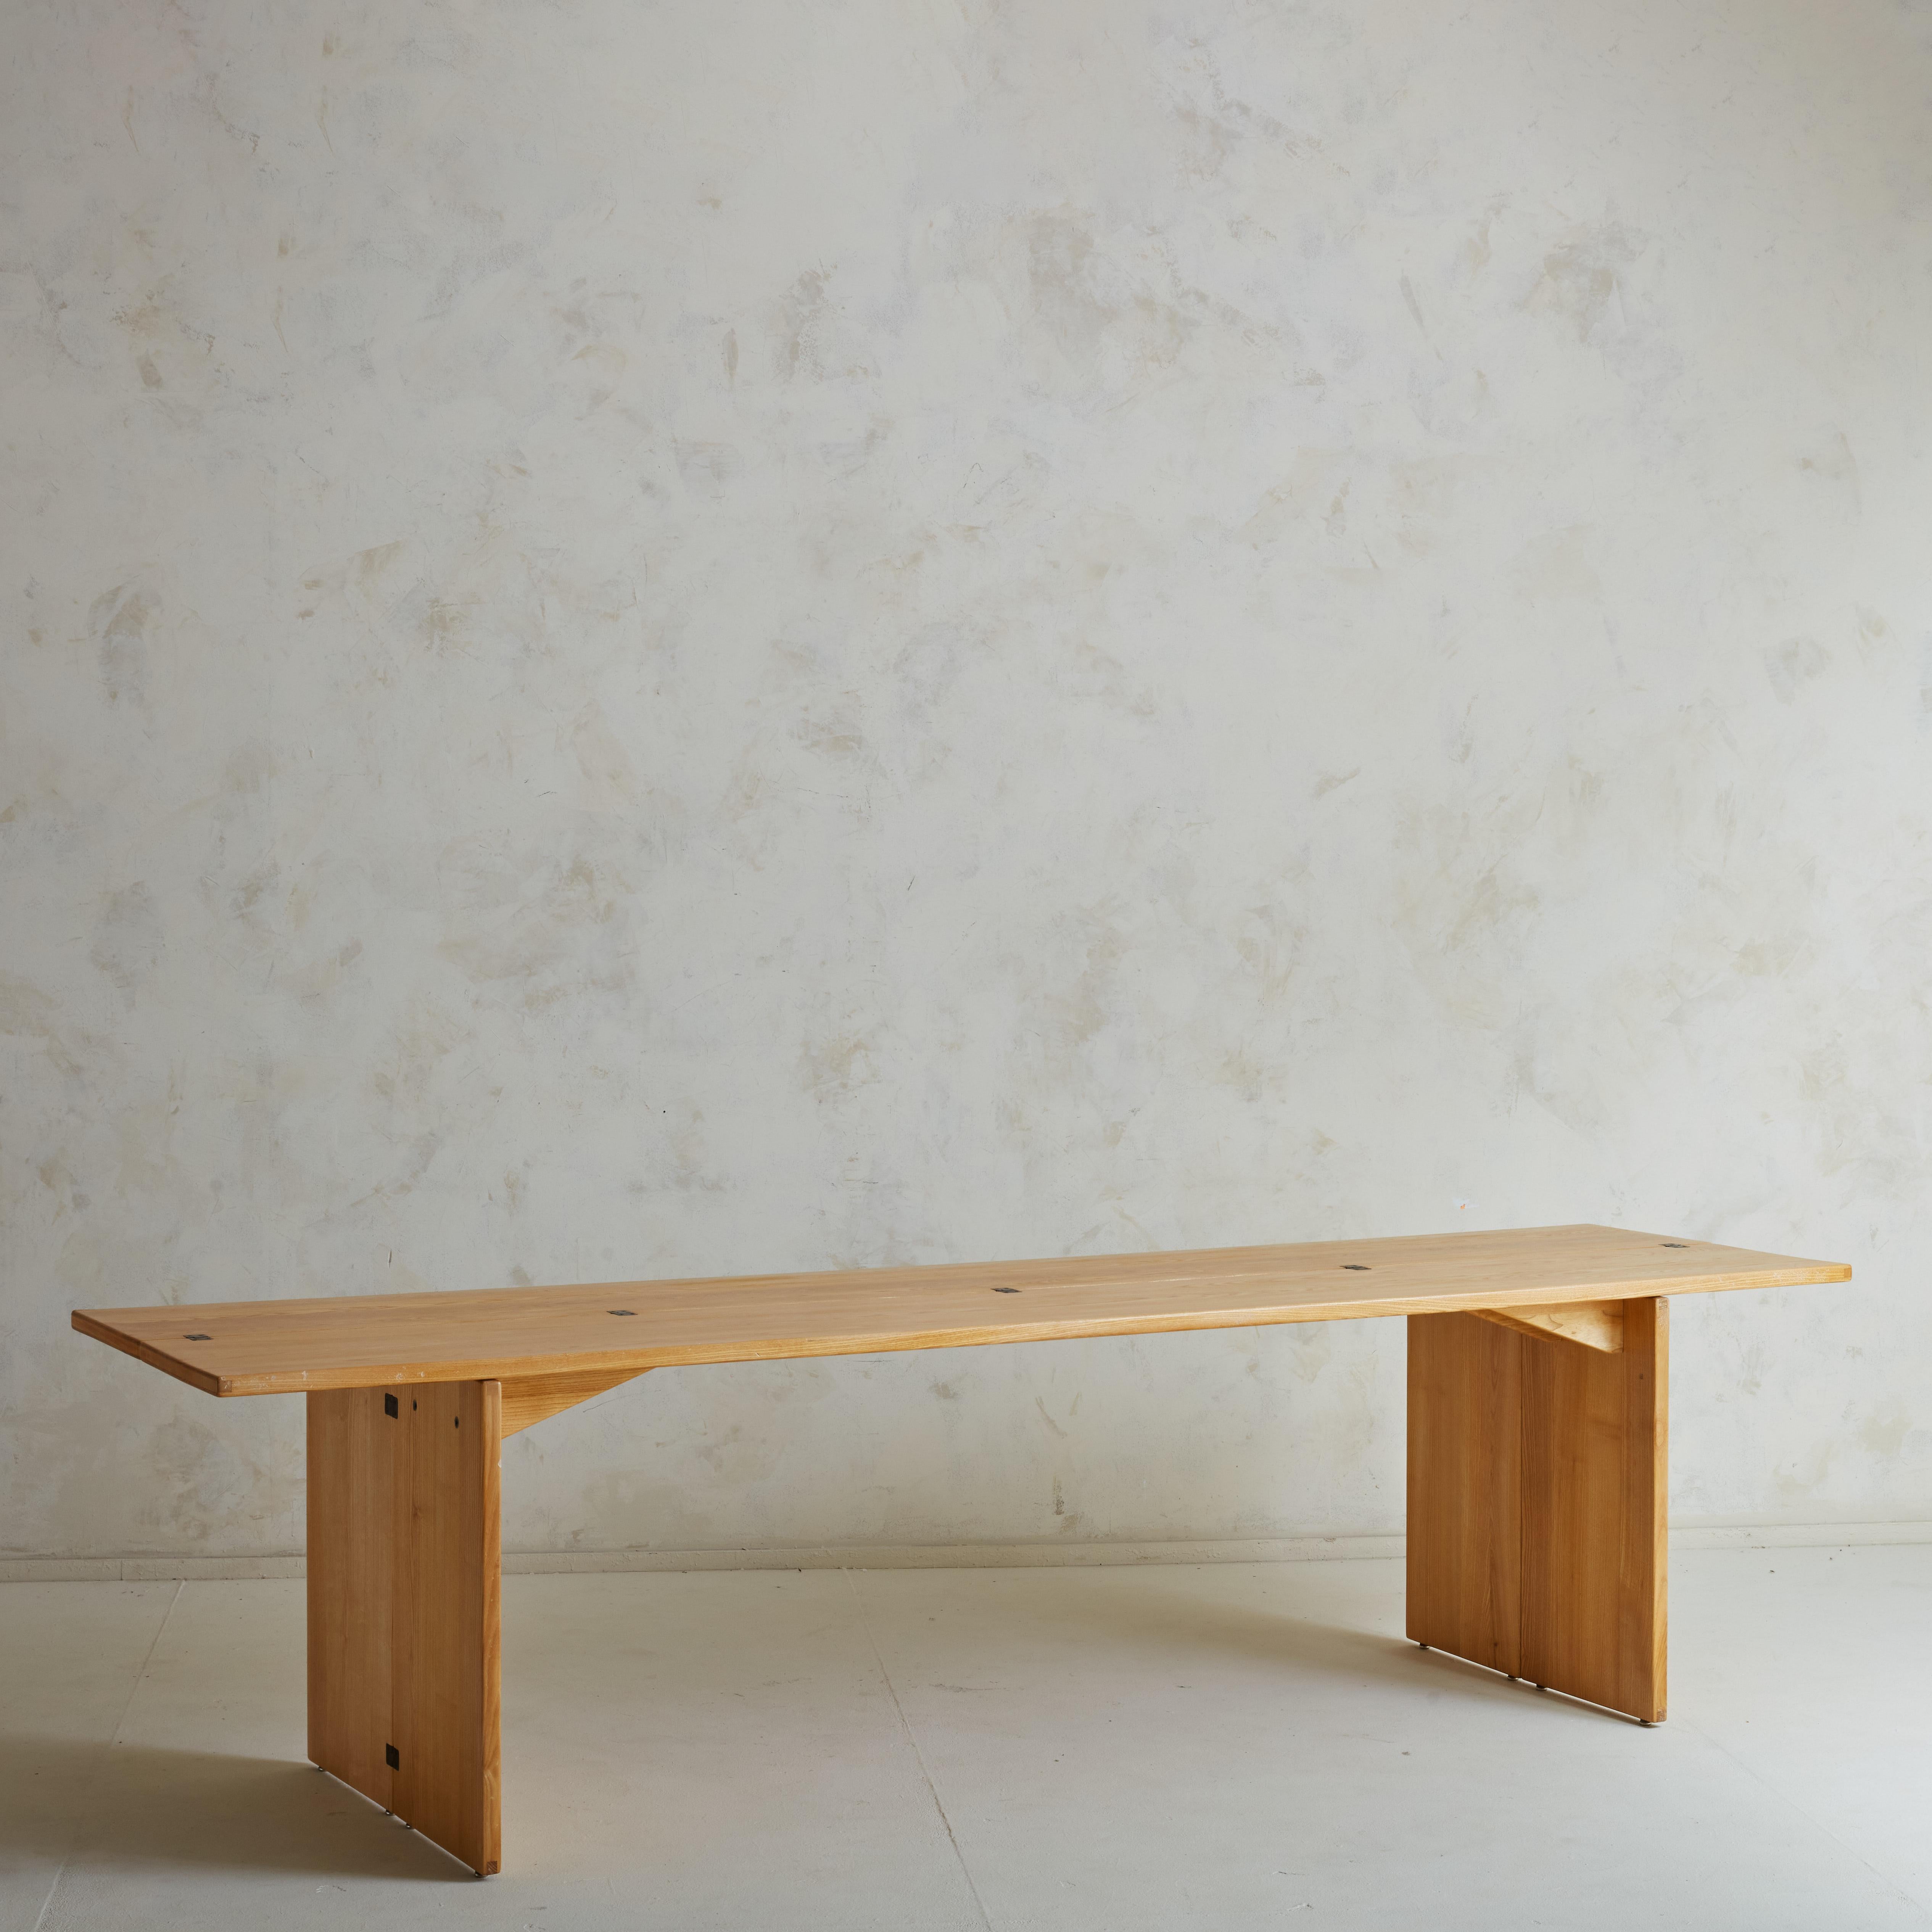 ‘La Barca’ extendable dining table designed by Piero De Martini in 1975 for Cassina featuring a beautiful honey hued oak.  La Barca means Boat. Both the legs and top extend to create a larger surface area the scale of a large dining table; when